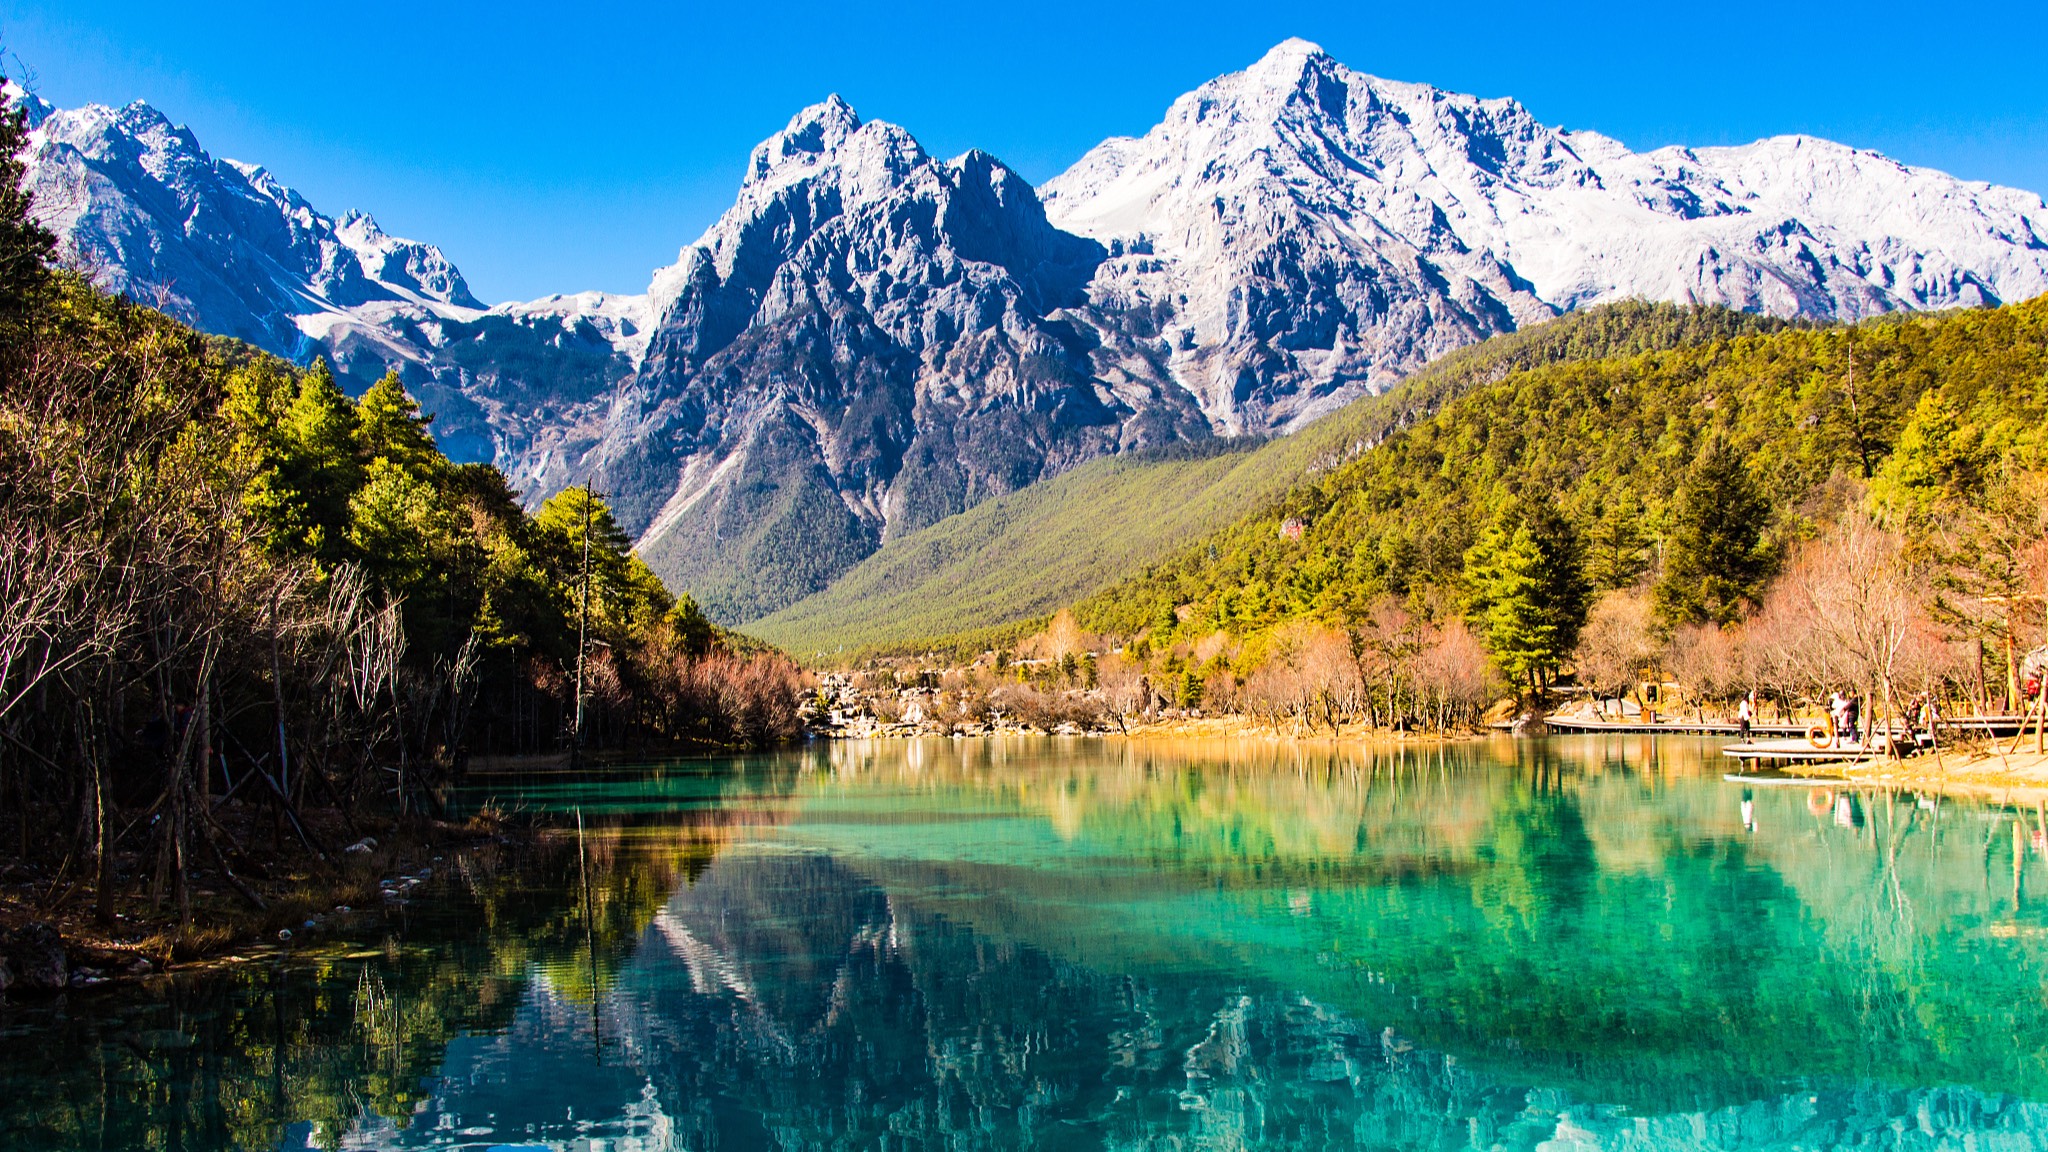 Live: Take in magnificent views of the Yulong Snow Mountain in southwest China's Yunnan